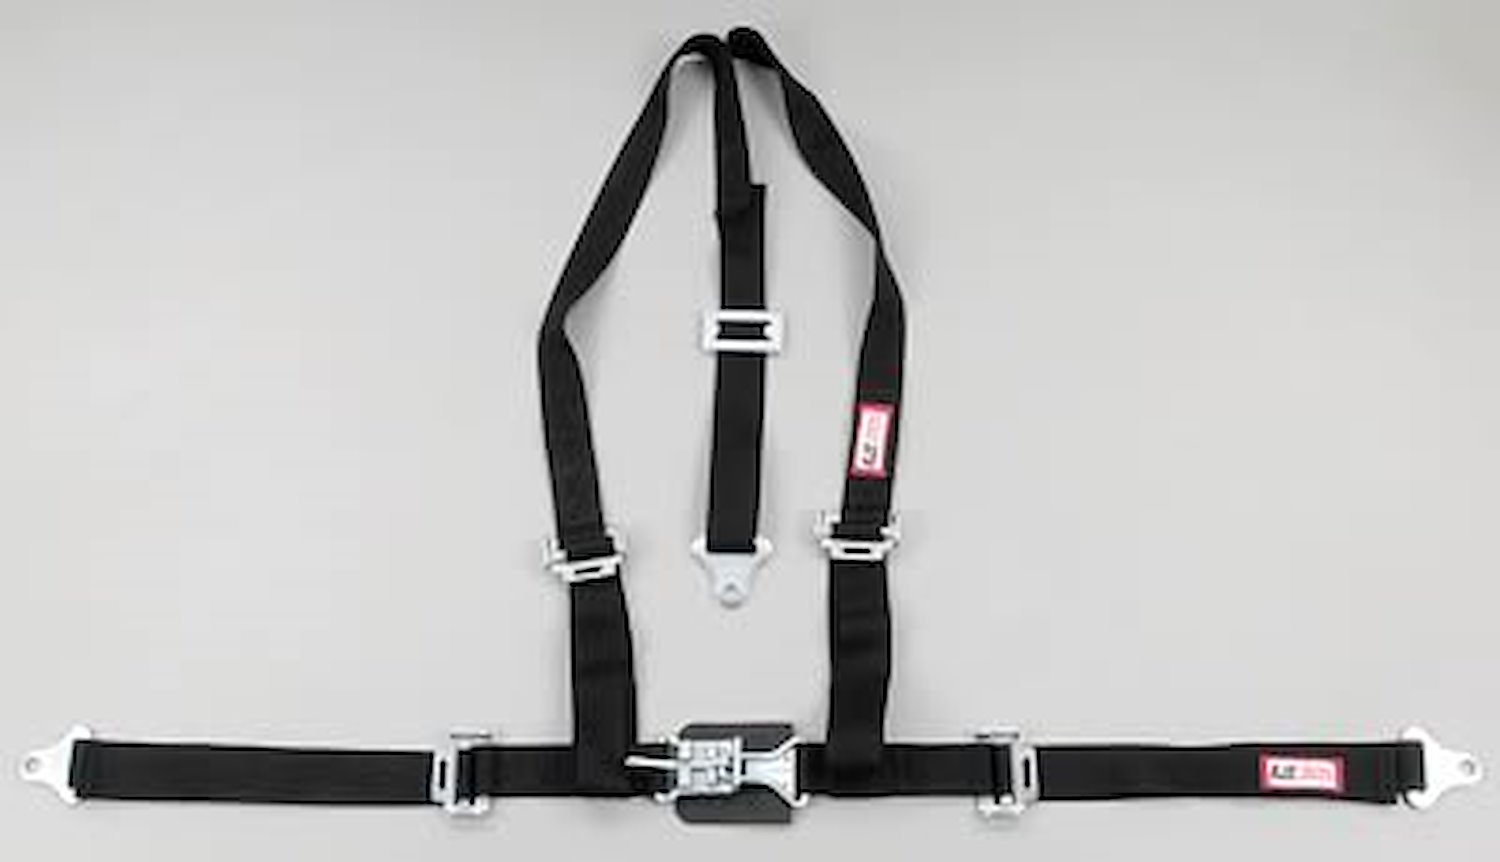 NON-SFI L&L HARNESS 3 PULL UP Lap Belt SNAP SEWN IN 2 S.H. Individual ROLL BAR Mount w/STERNUM STRAP WRAP/SNAP PURPLE